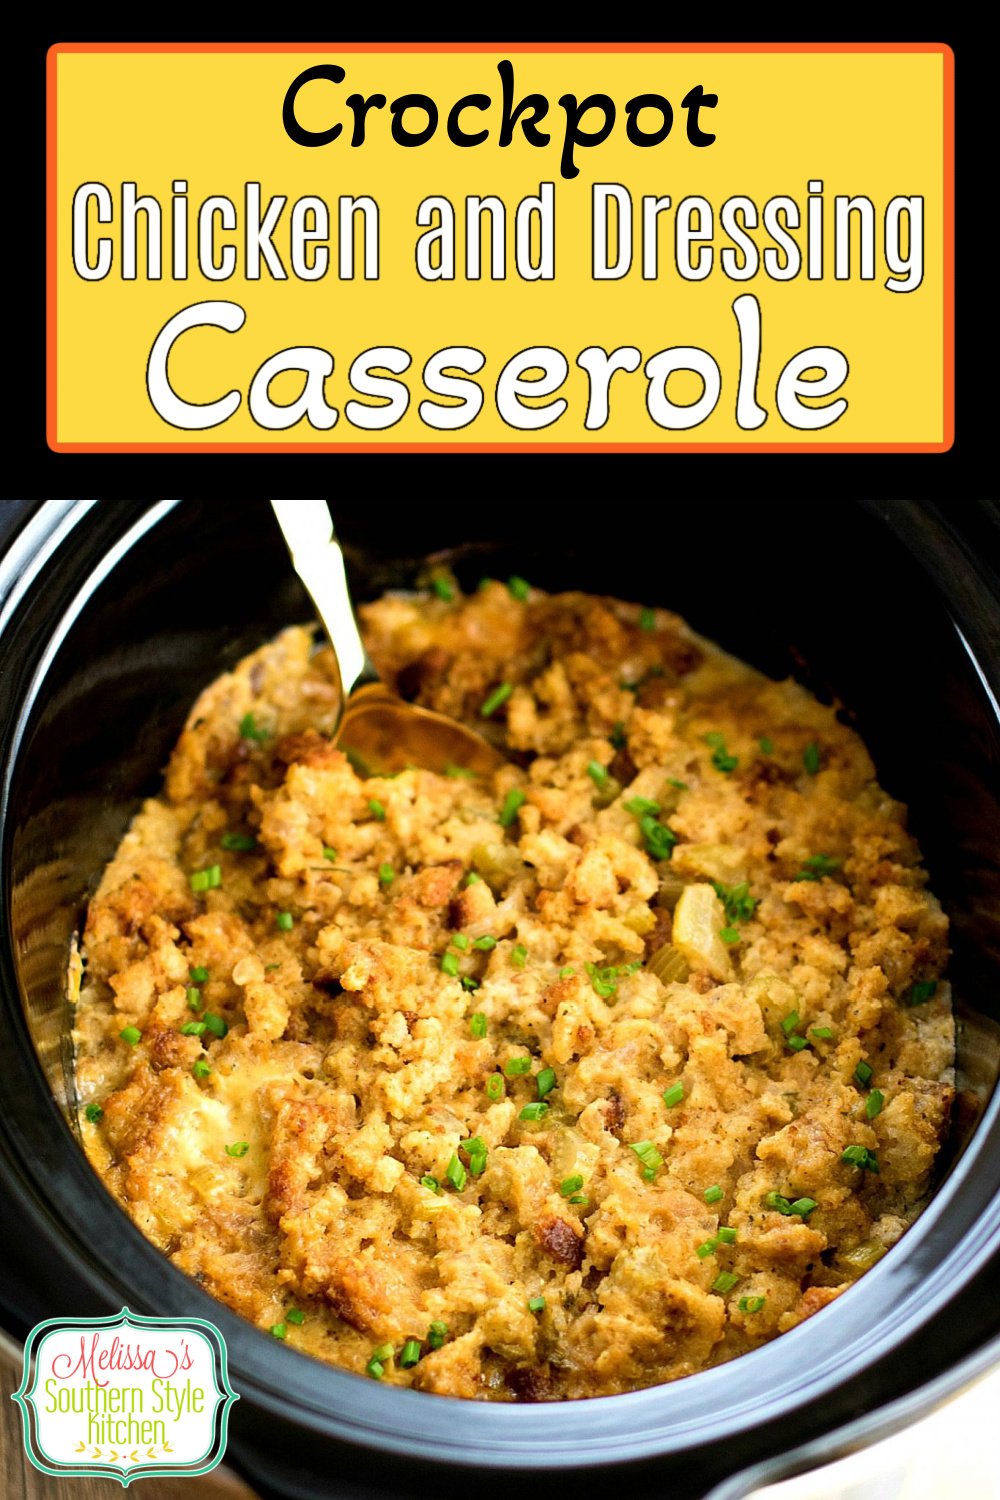 Make and serve this Crockpot Chicken and Dressing Casserole straight from your slow cooker #crockpotchicken #slowcookerchickenrecipes #chickenanddressingcasserole #easychickenrecipes #crockpotchickencasserole #dressing #dinner #dinnerideas #southernfood #southernrecipes #food #easyrecipes #southerncornbreaddressing